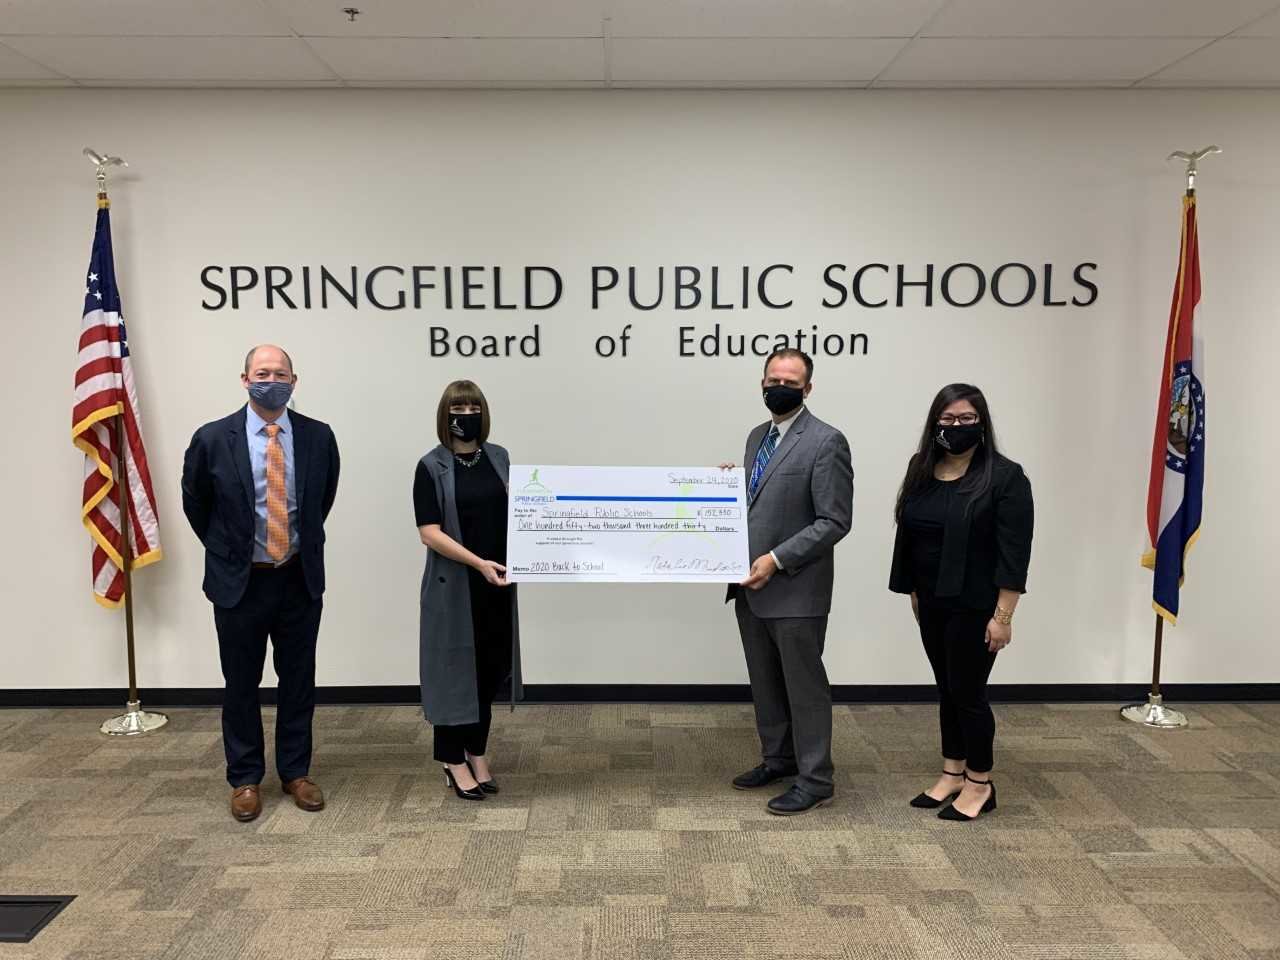 SPS Superintendent John Jungmann, second from right, accepts a ceremonial check from foundation officials, from left, Stephen Gintz, Natalie Murdock and Tina Pham.